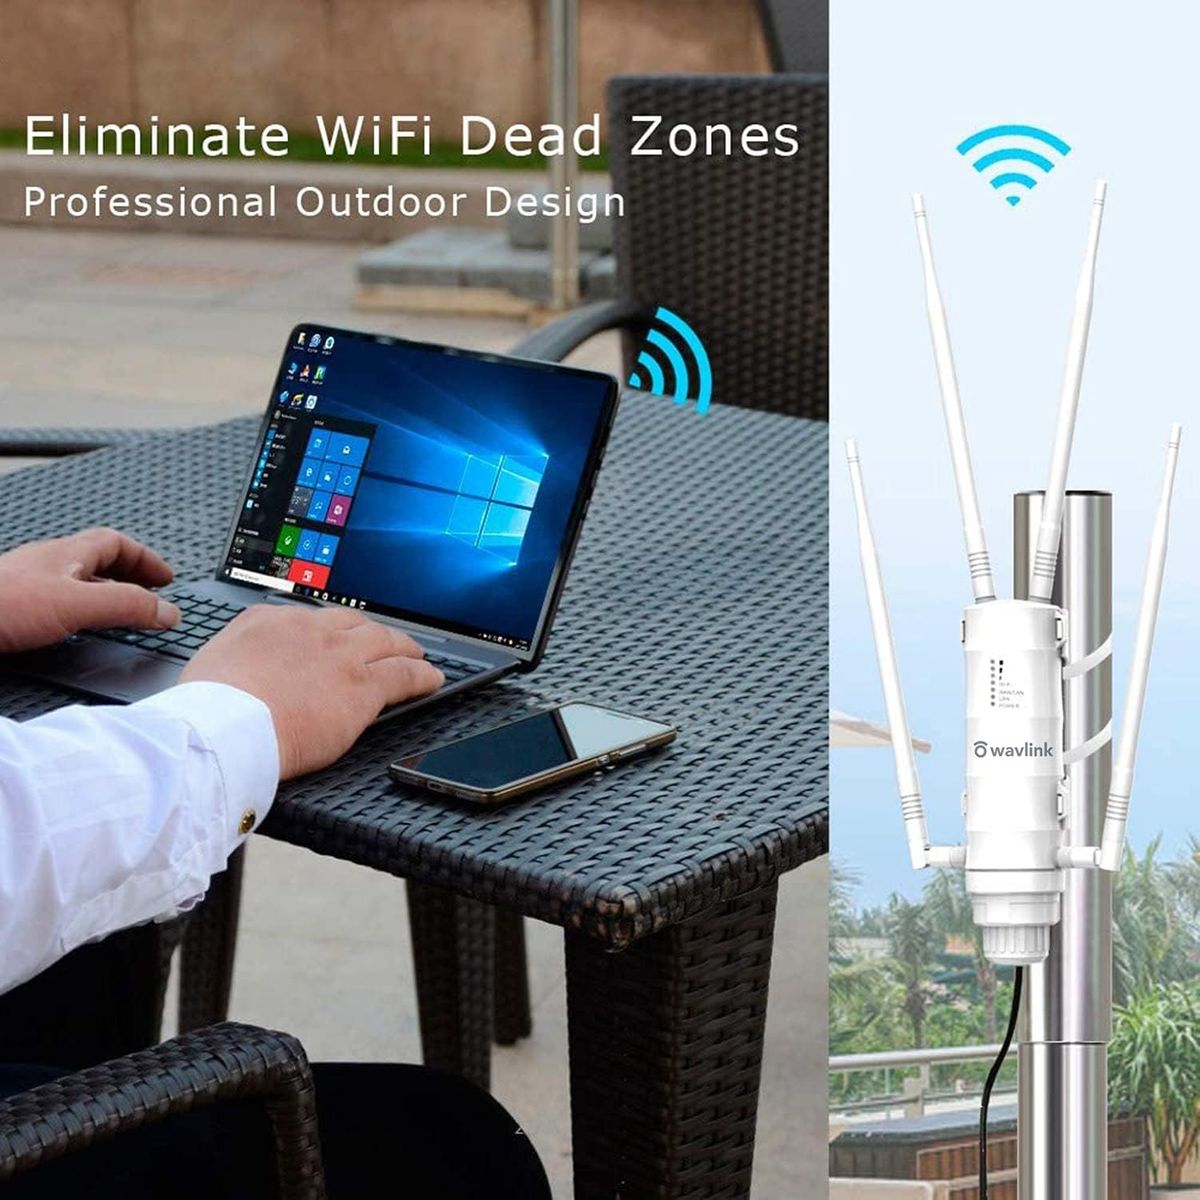 TamperSeals Dualband 2.4+5G 1200Mbit/s Outdoor WLAN Access Point/Wireless Mesh Repeater/WiFi Extender (1xGigabit LAN-Port, 24V Passiv PoE, 2x2 MIMO, Hohe Reichweite 500m, Wetterfestes, 4x7dBi Antennen, WN572HP3)